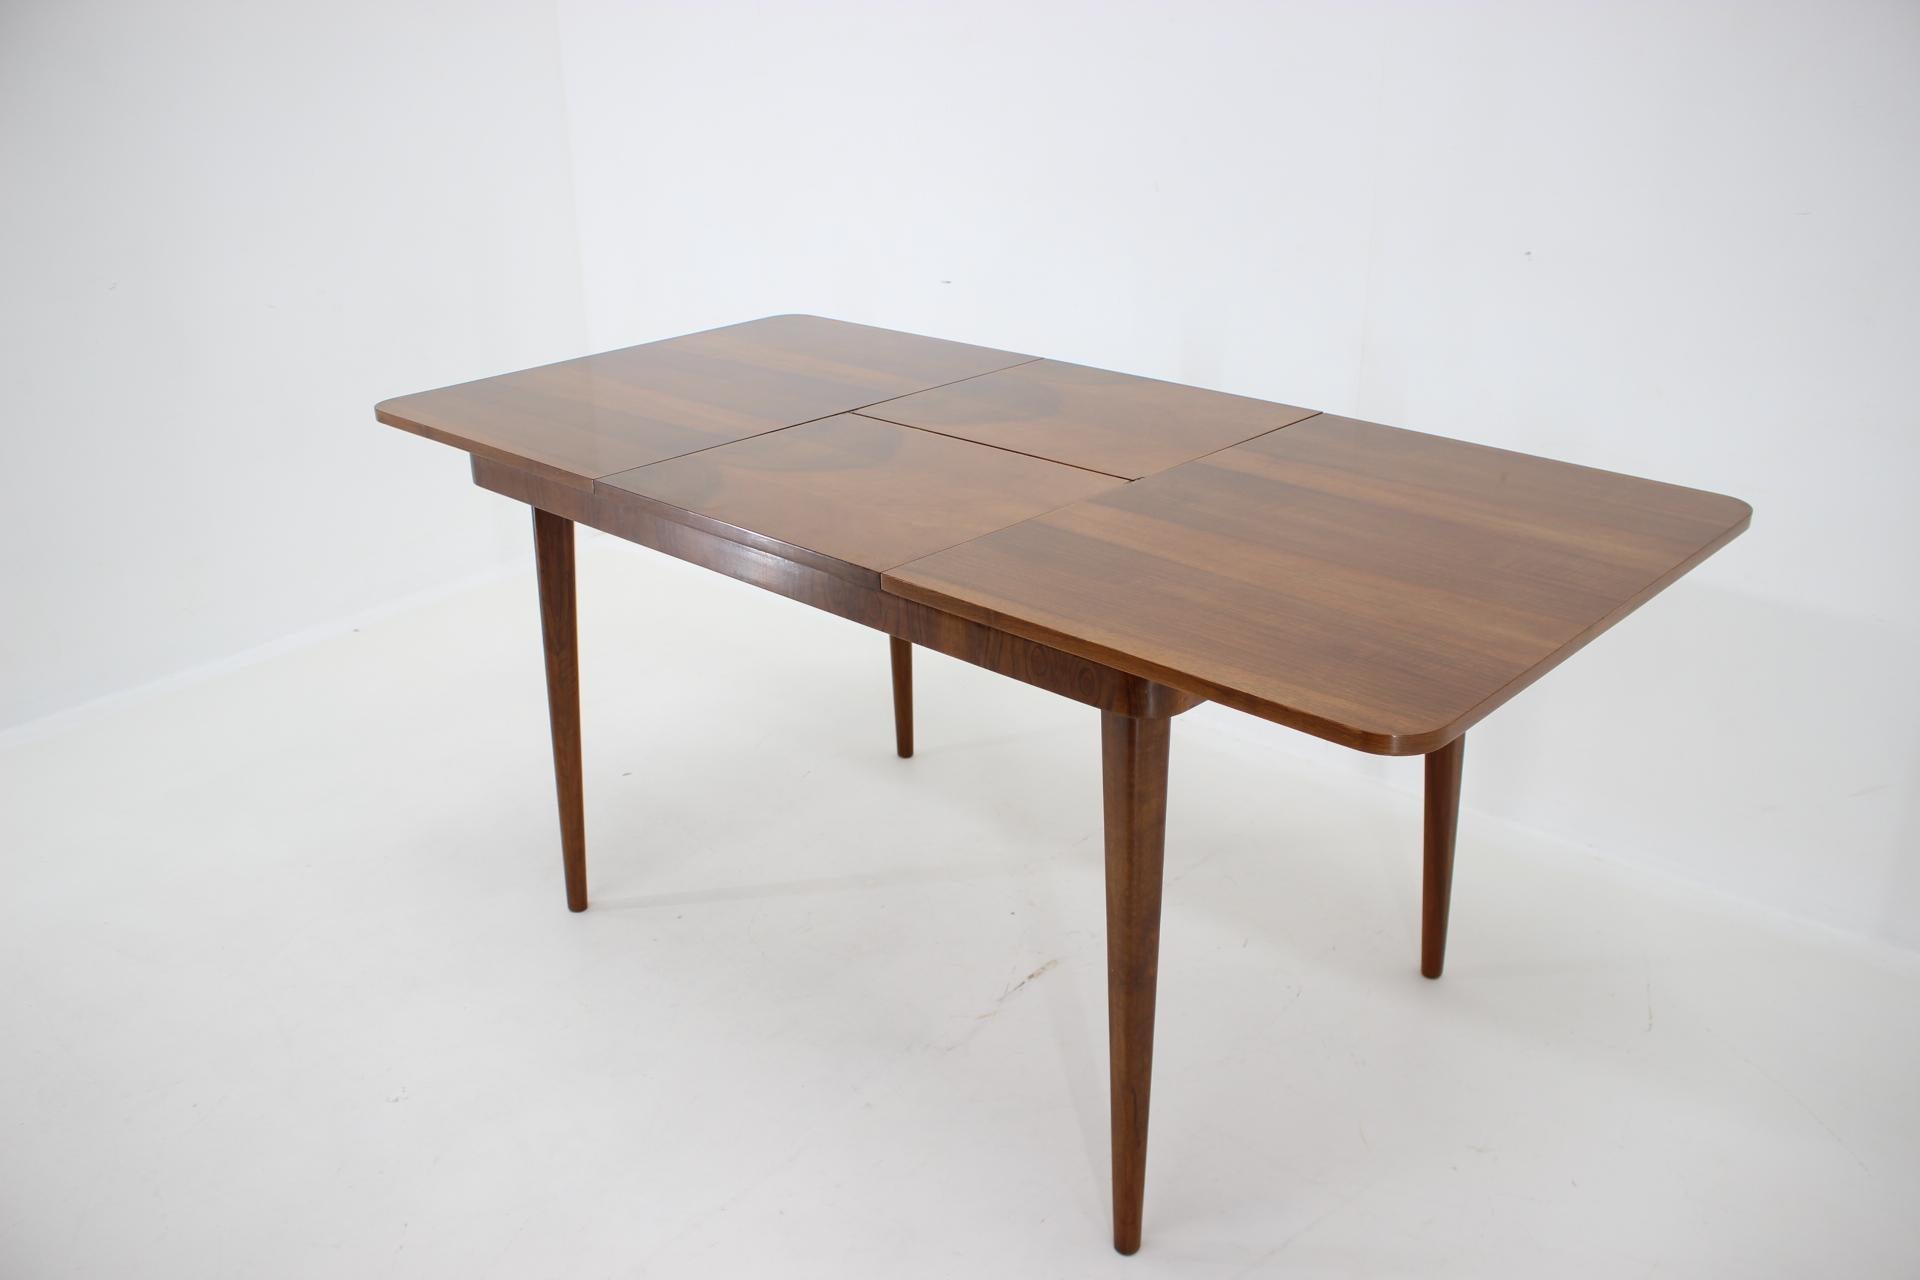 1950s Extendable Dining Table in Walnut by UP zavody, Czechoslovakia For Sale 6